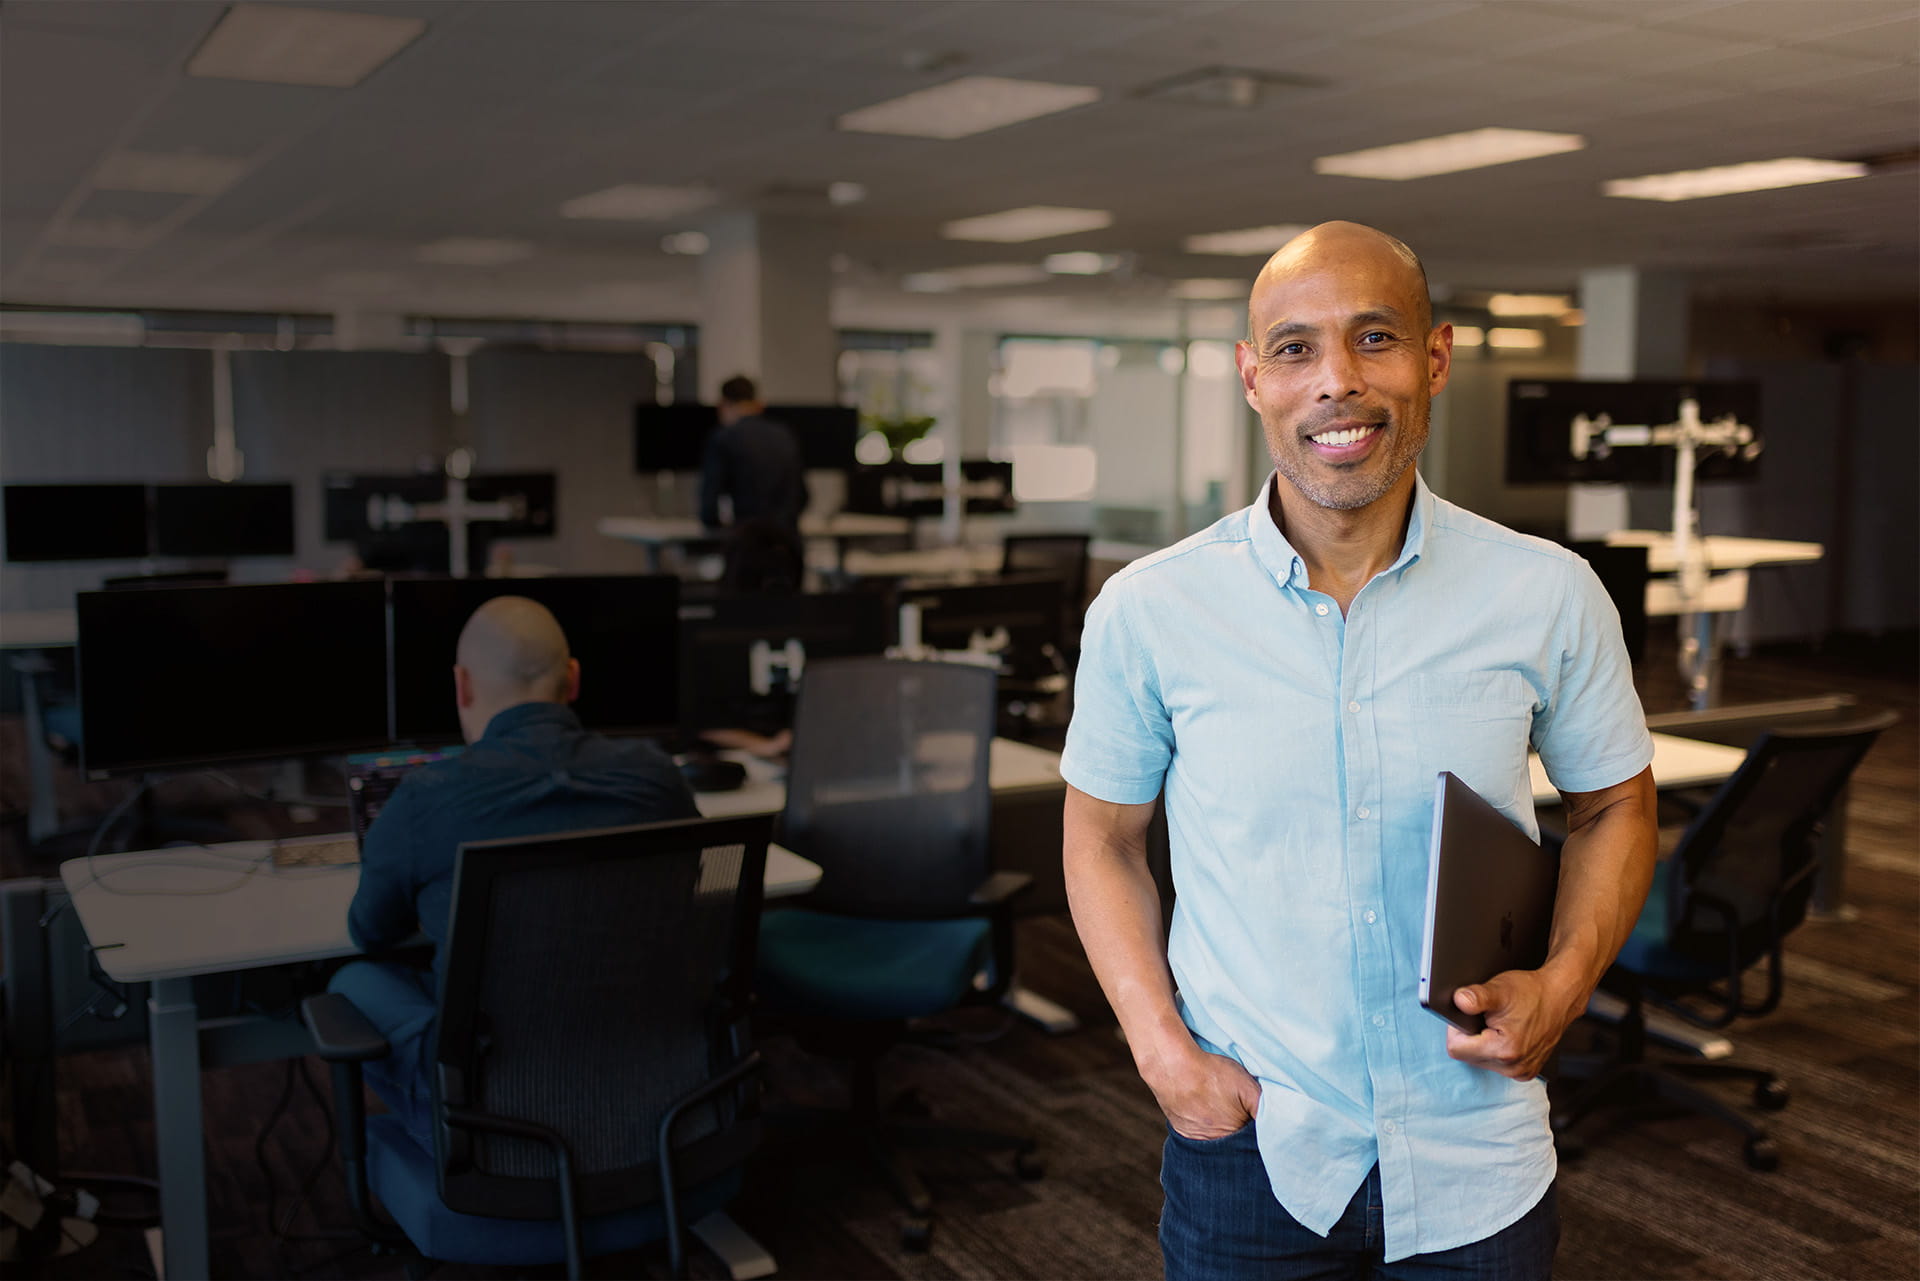 Manager, Developer Relations at WP Engine, man with hand in pocket holding laptop and smiling in office setting